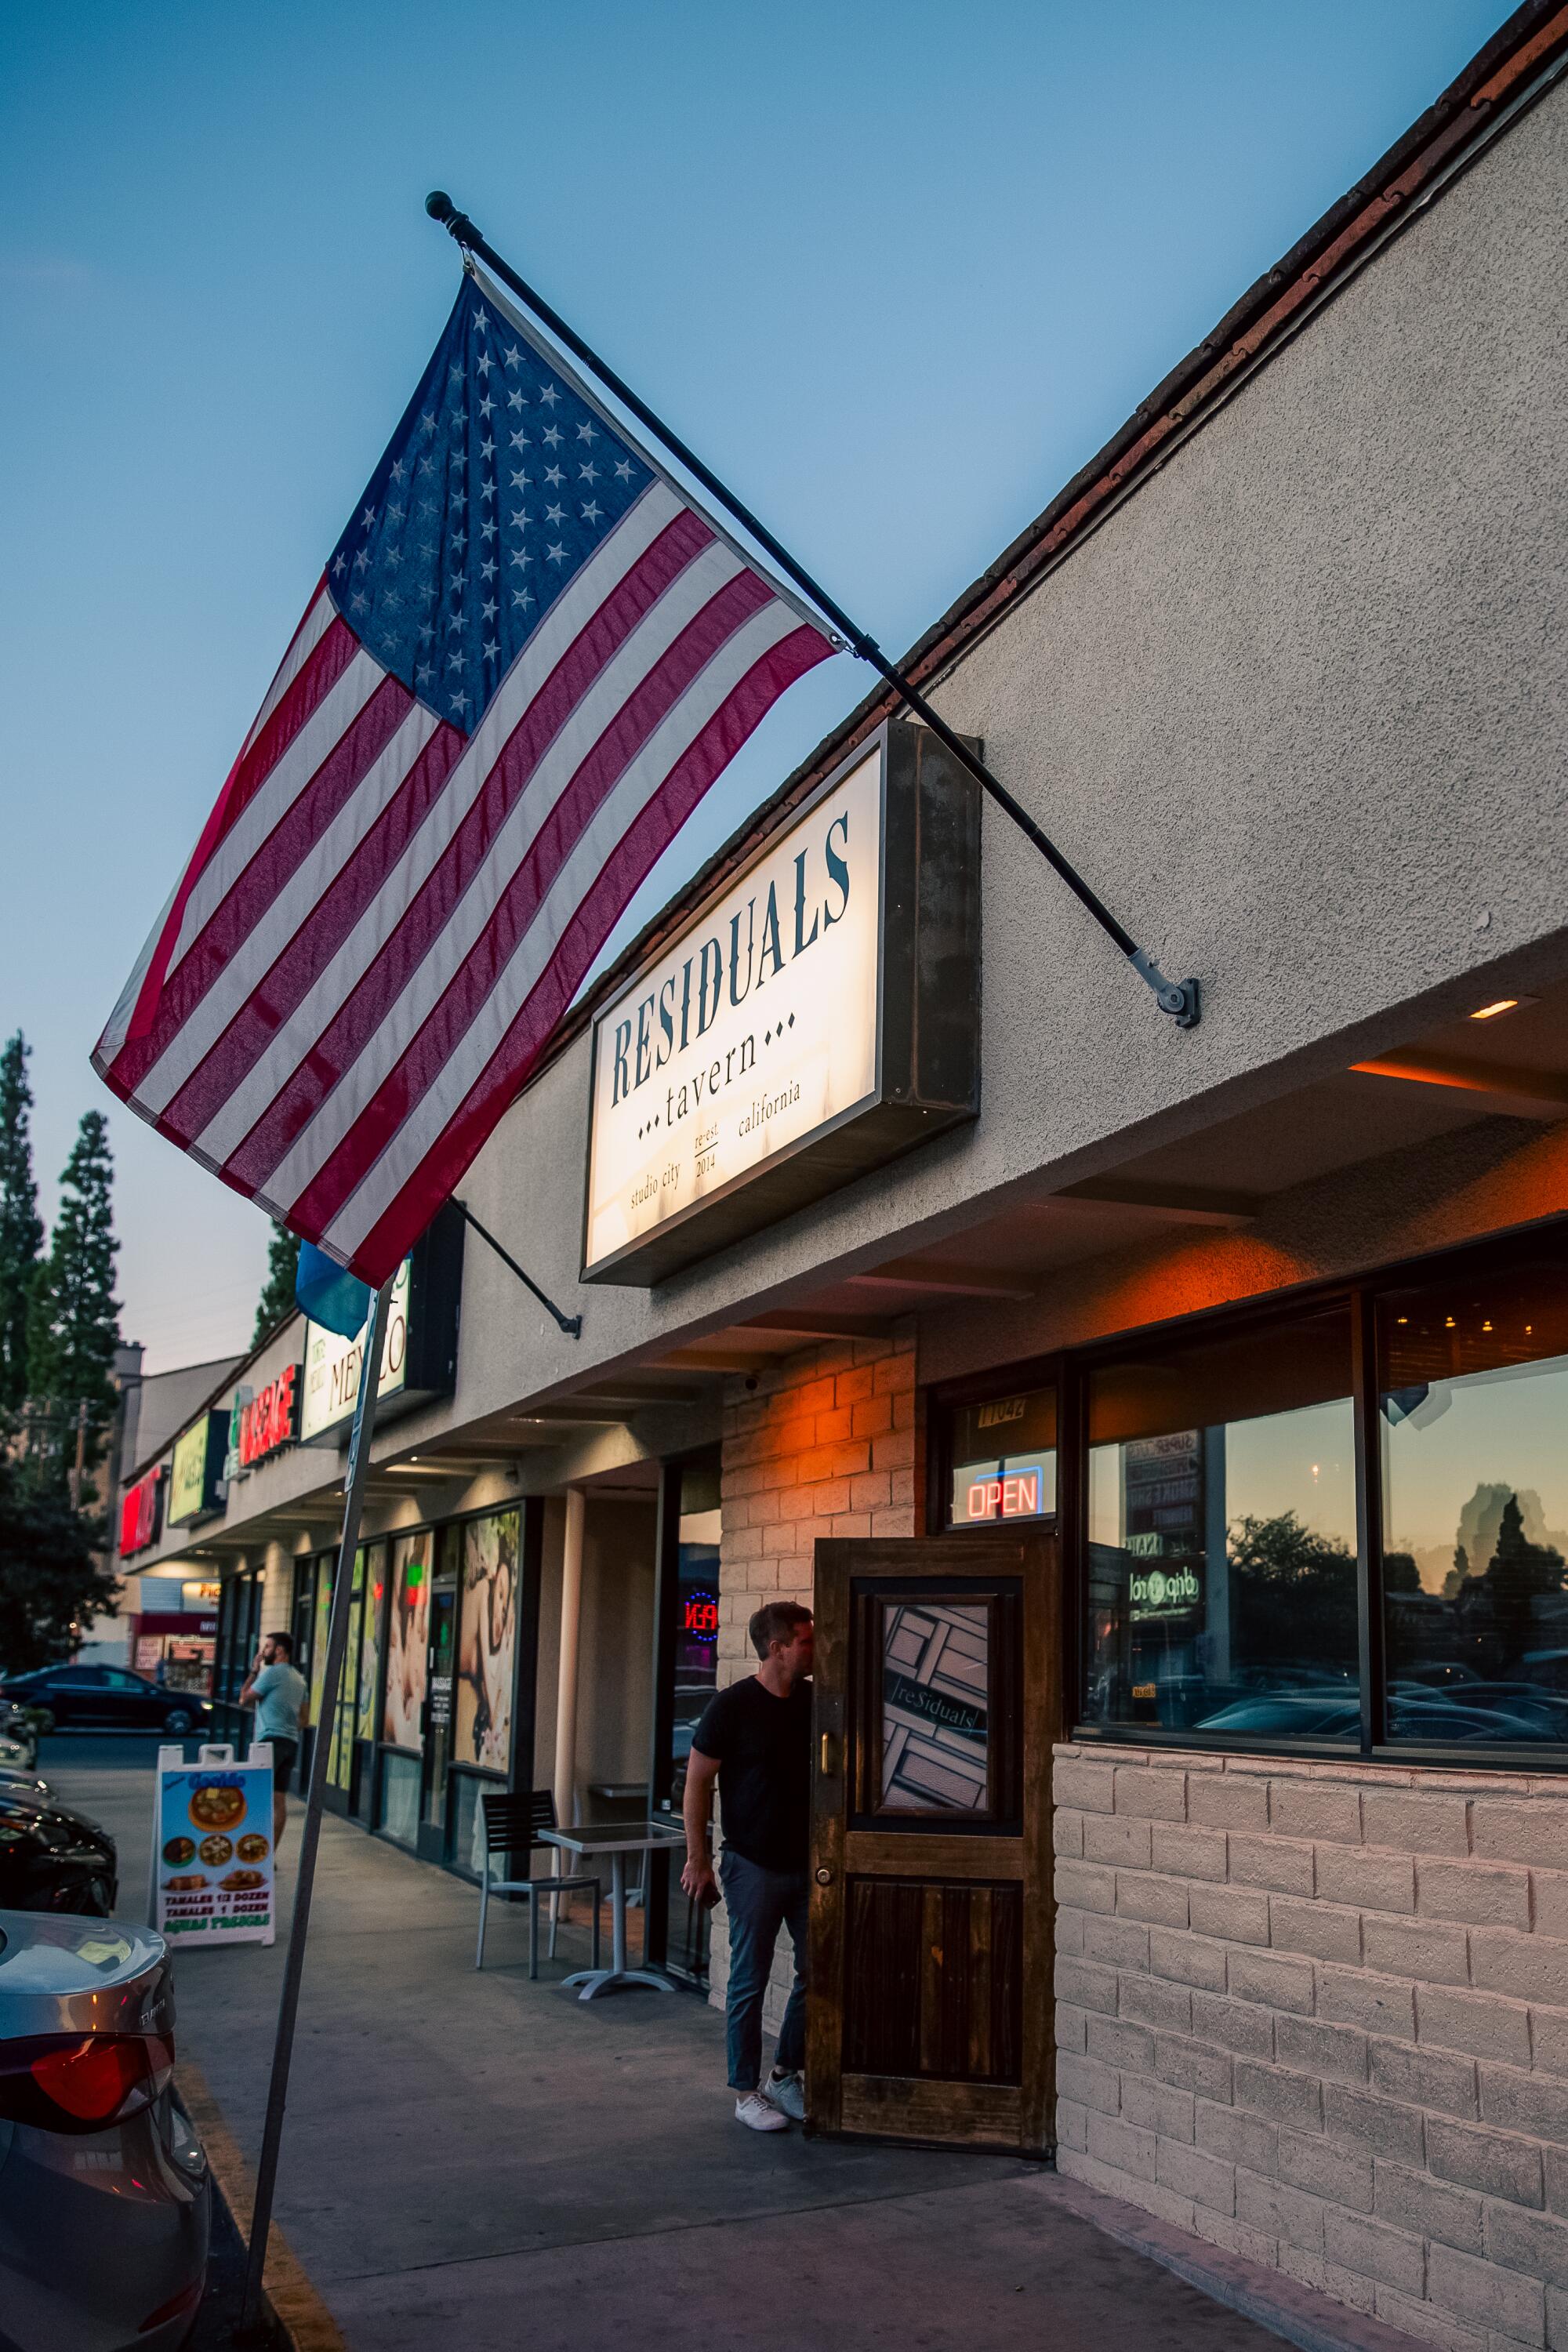 An exterior of a bar with an American flag.